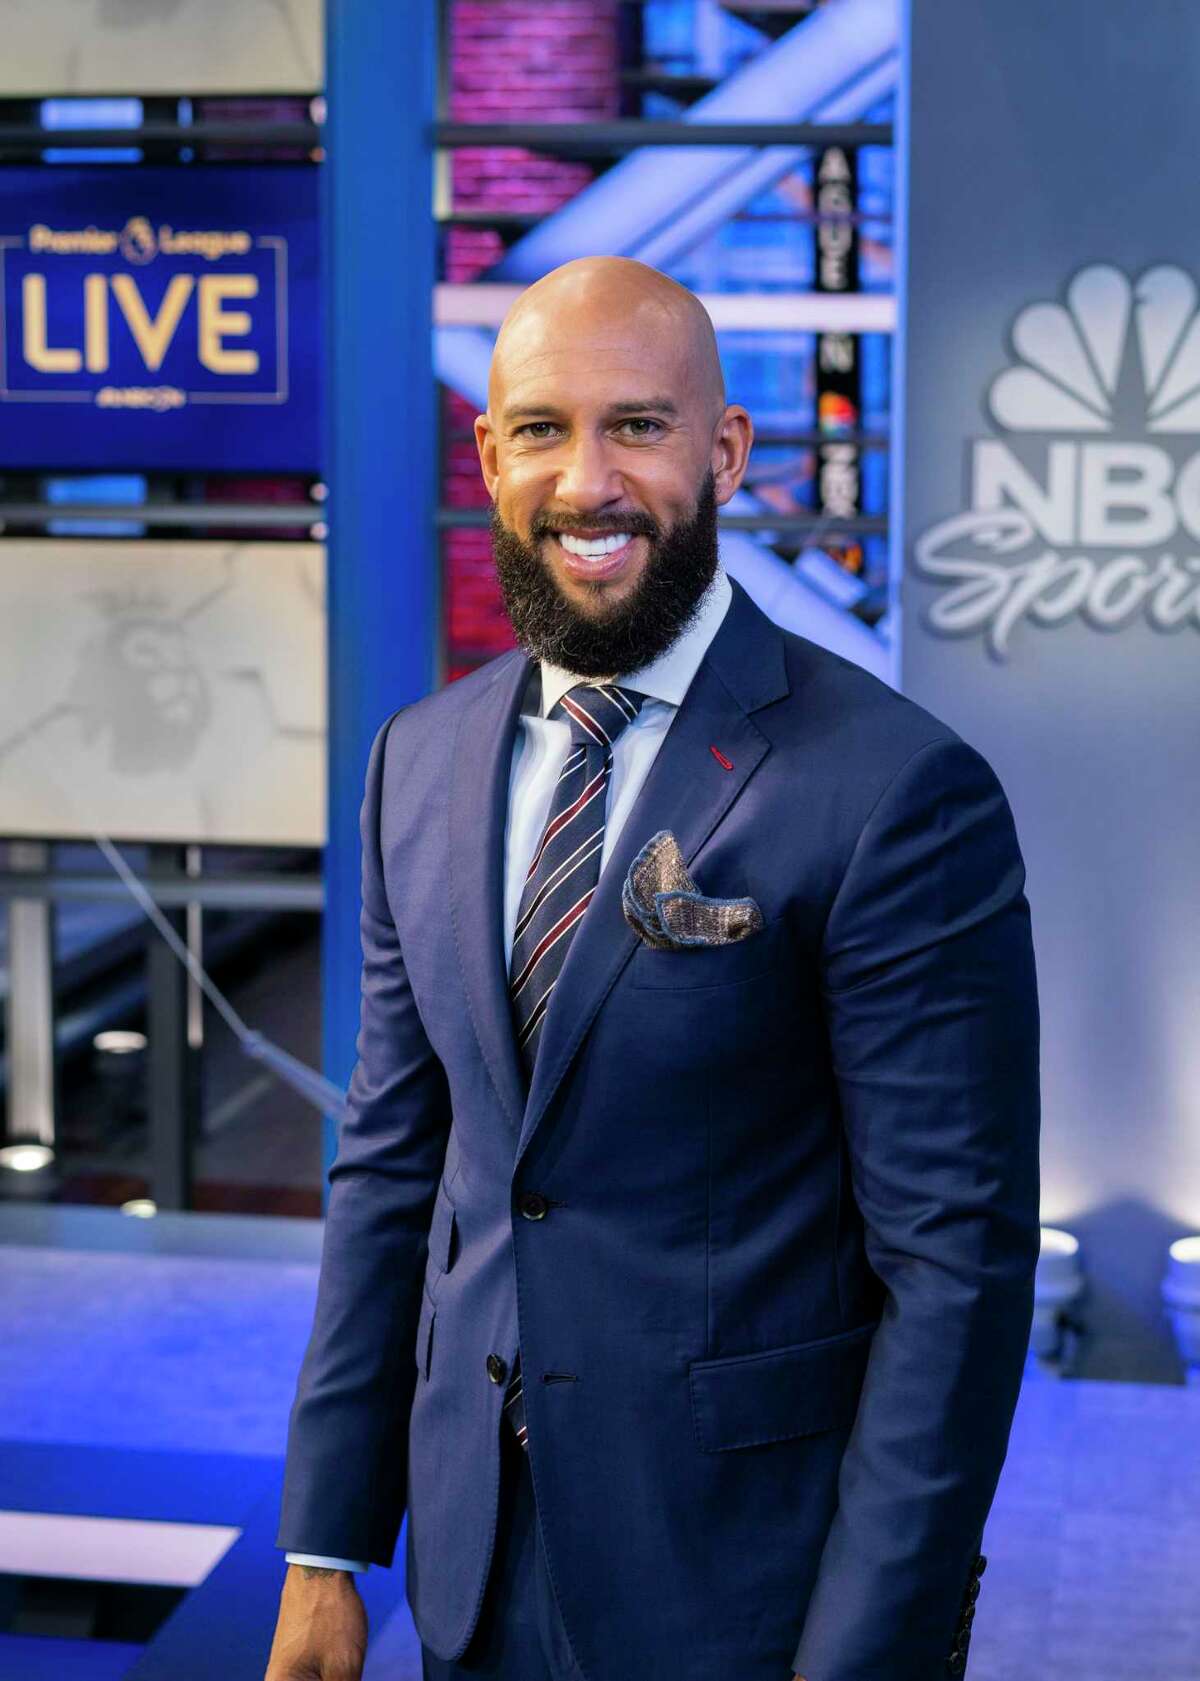 Tim Howard is a Premier League analyst for NBC Sports. Howard is a former goalkeeper for Premier League teams Everton and Manchester United and was the longtime No. 1 goalkeeper for the U.S. men’s national team.